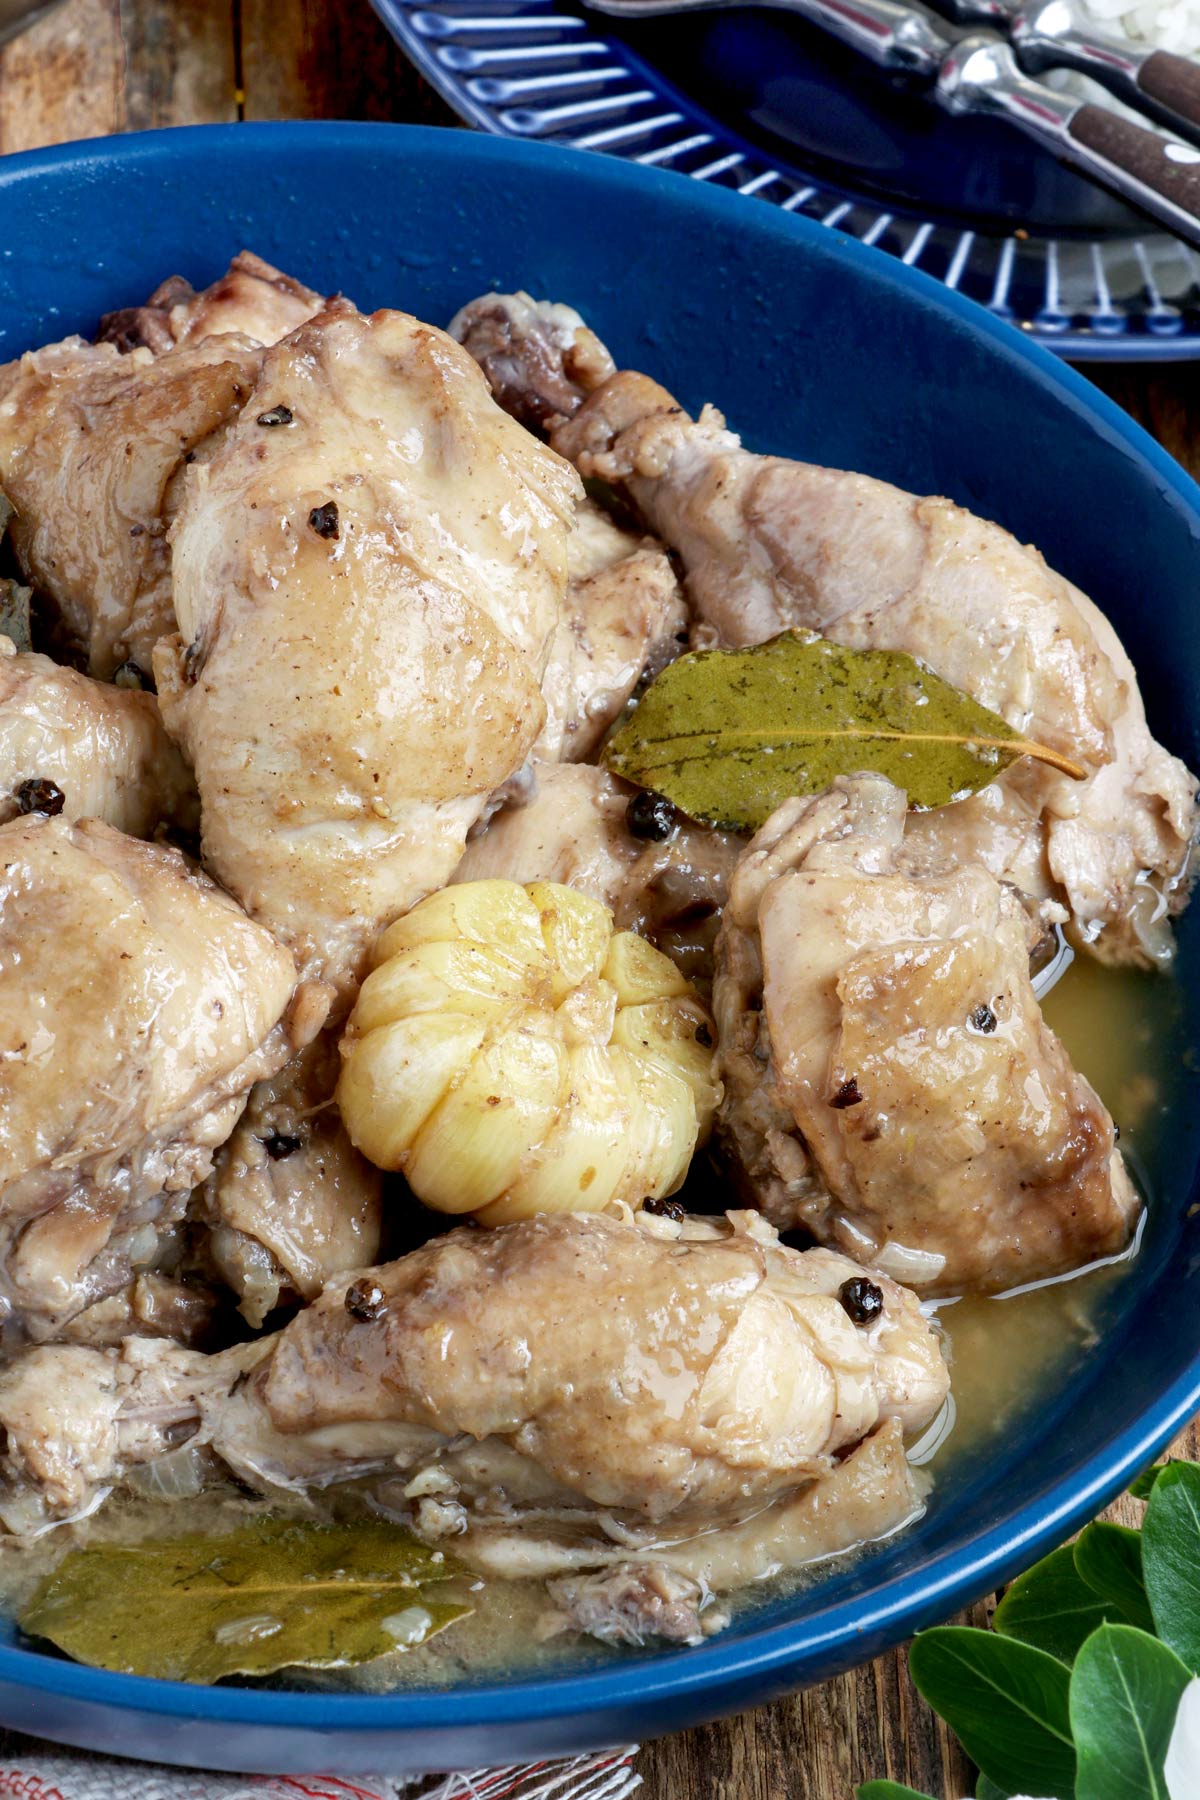 Tangy, savory, and garlicky Adobong Puti in a serving bowl.